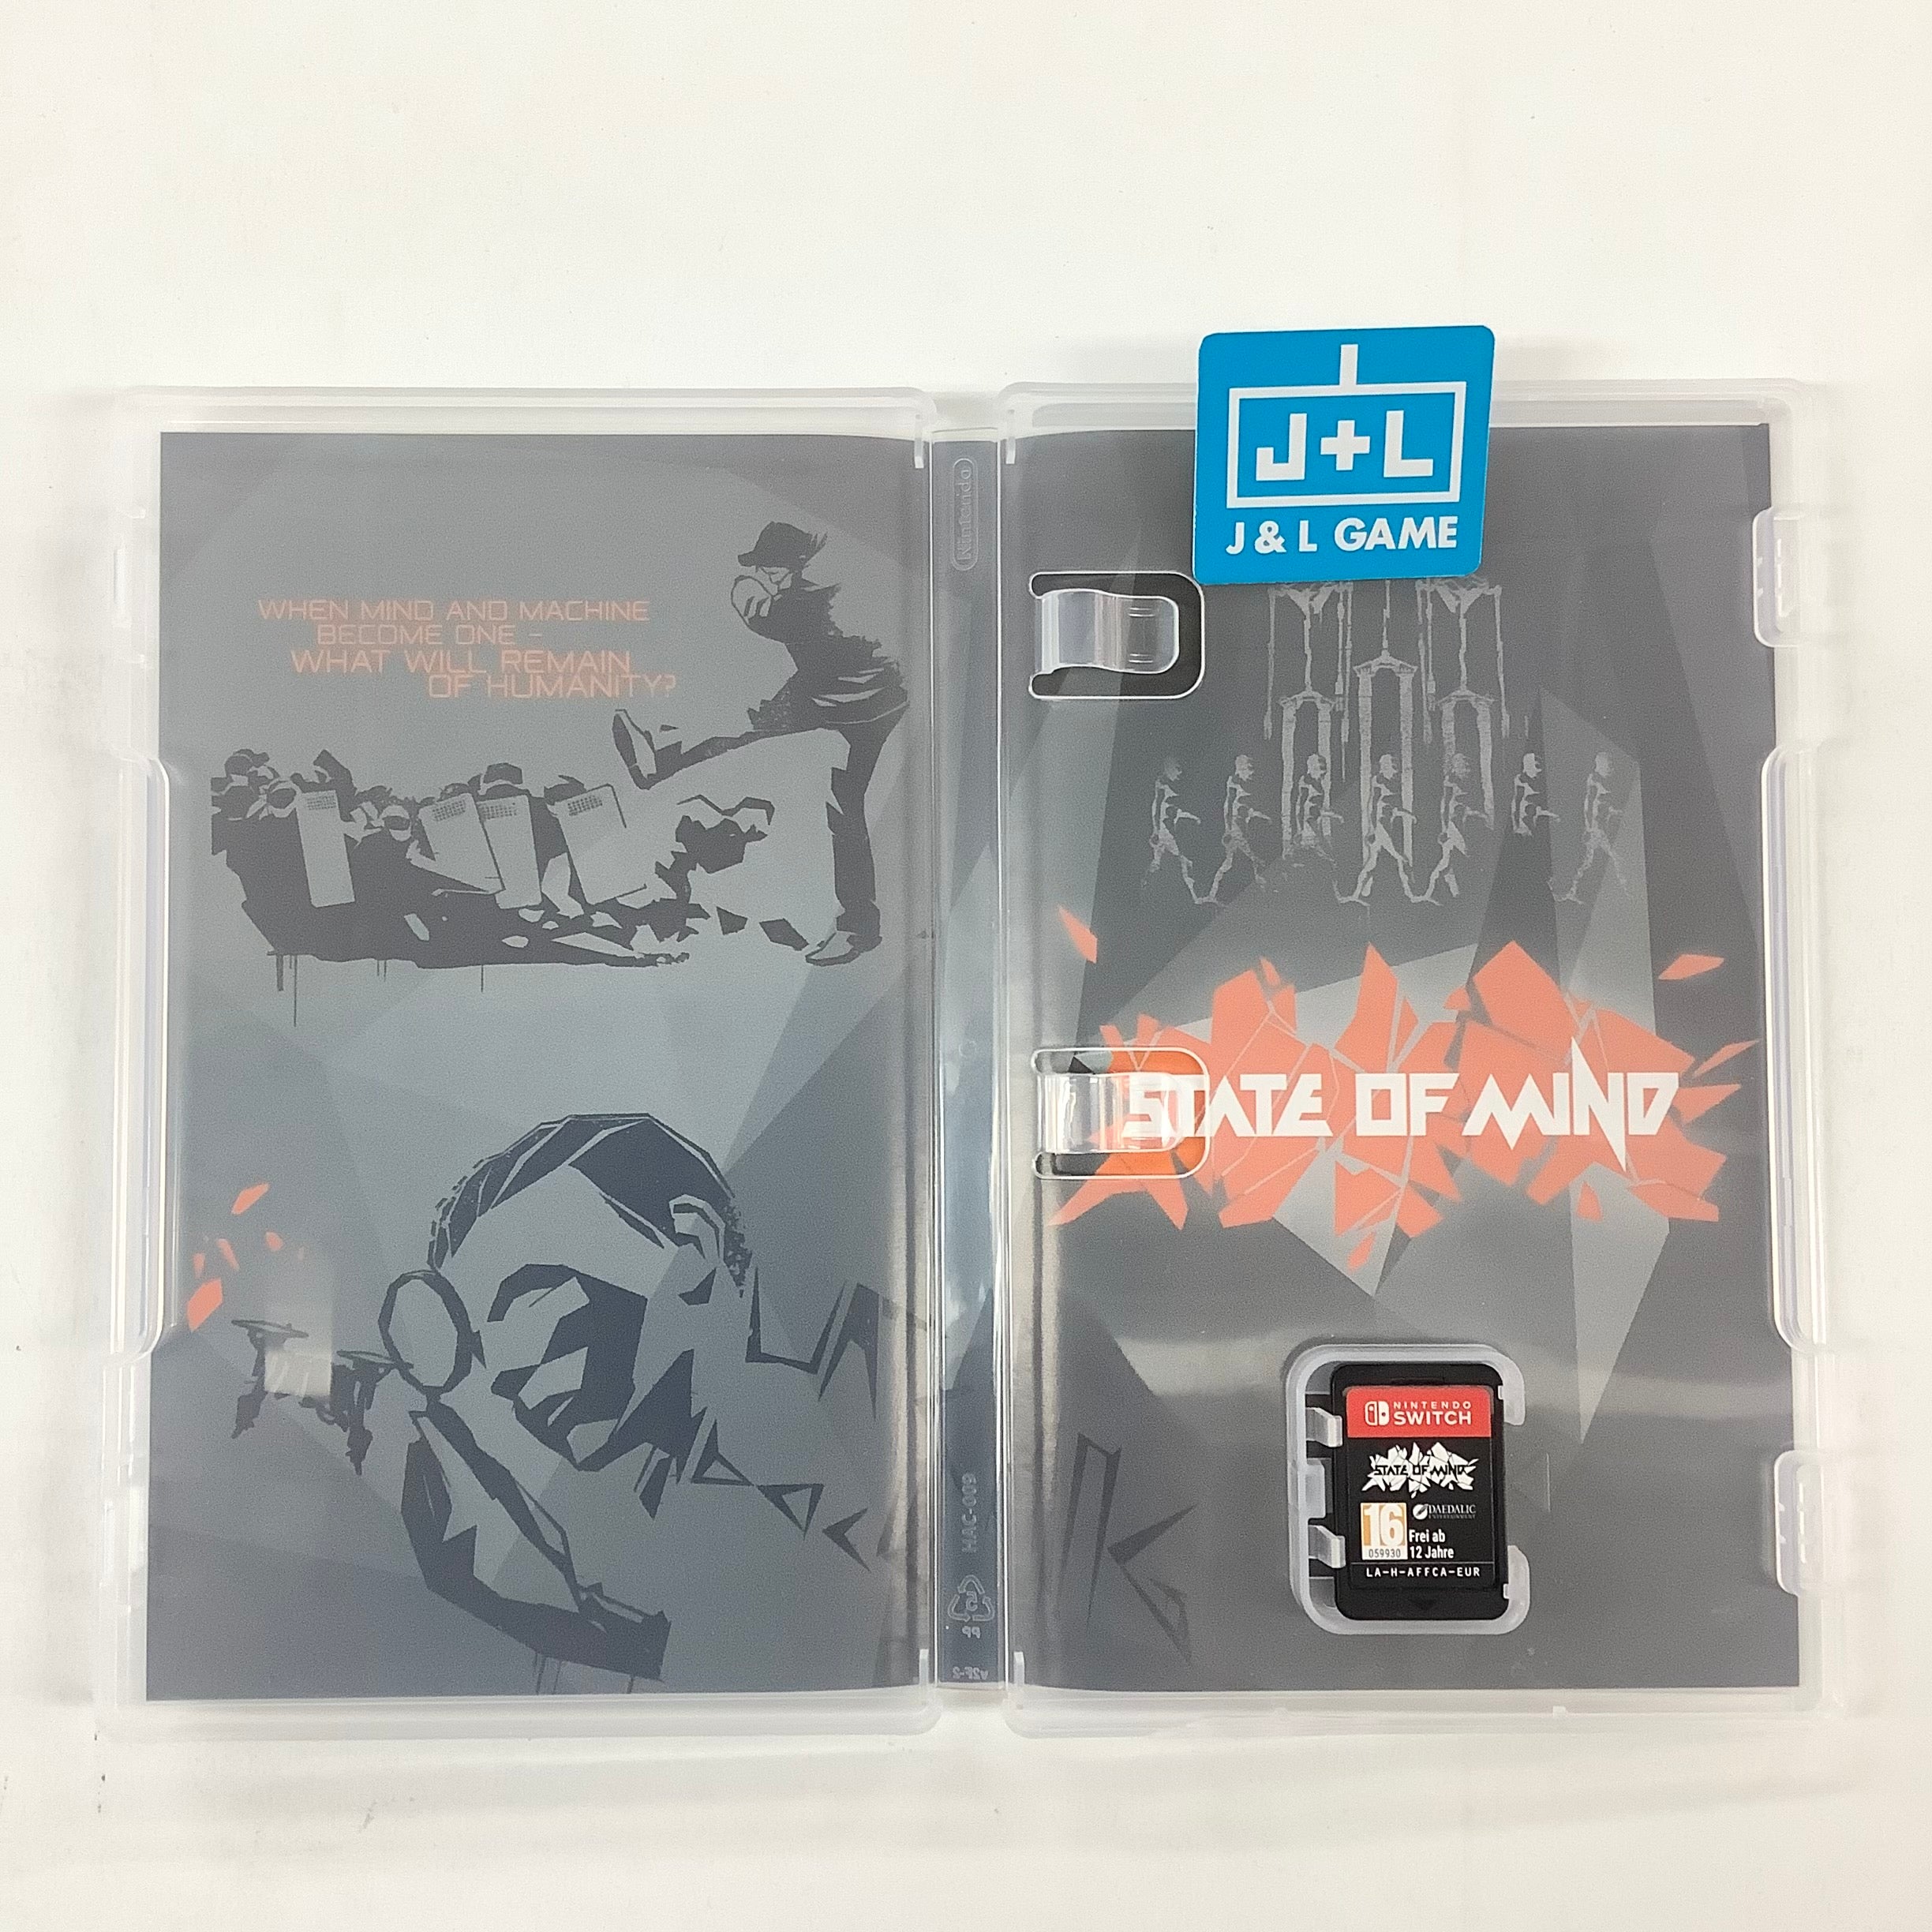 State of Mind - (NSW) Nintendo Switch [Pre-Owned] (European Import) Video Games Daedalic Entertainment   